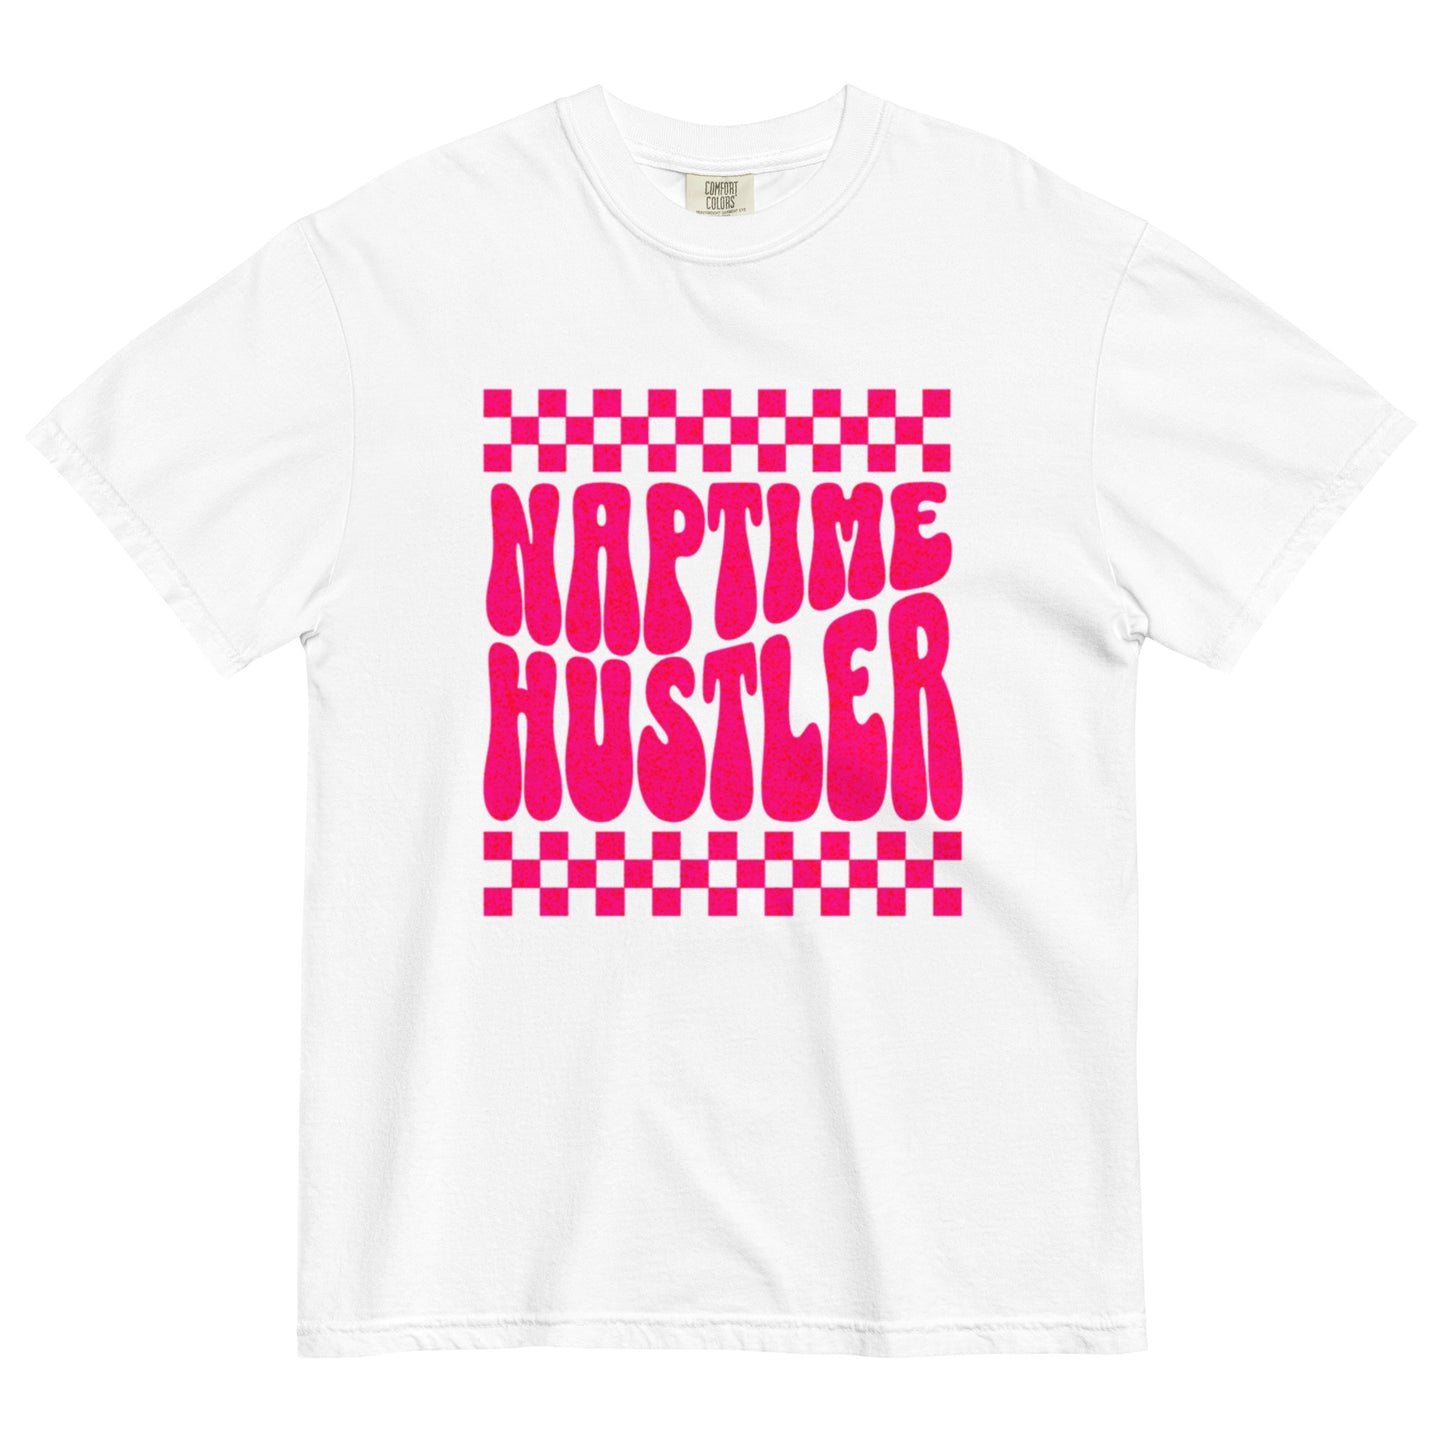 The Naptime Hustle Graphic Tee